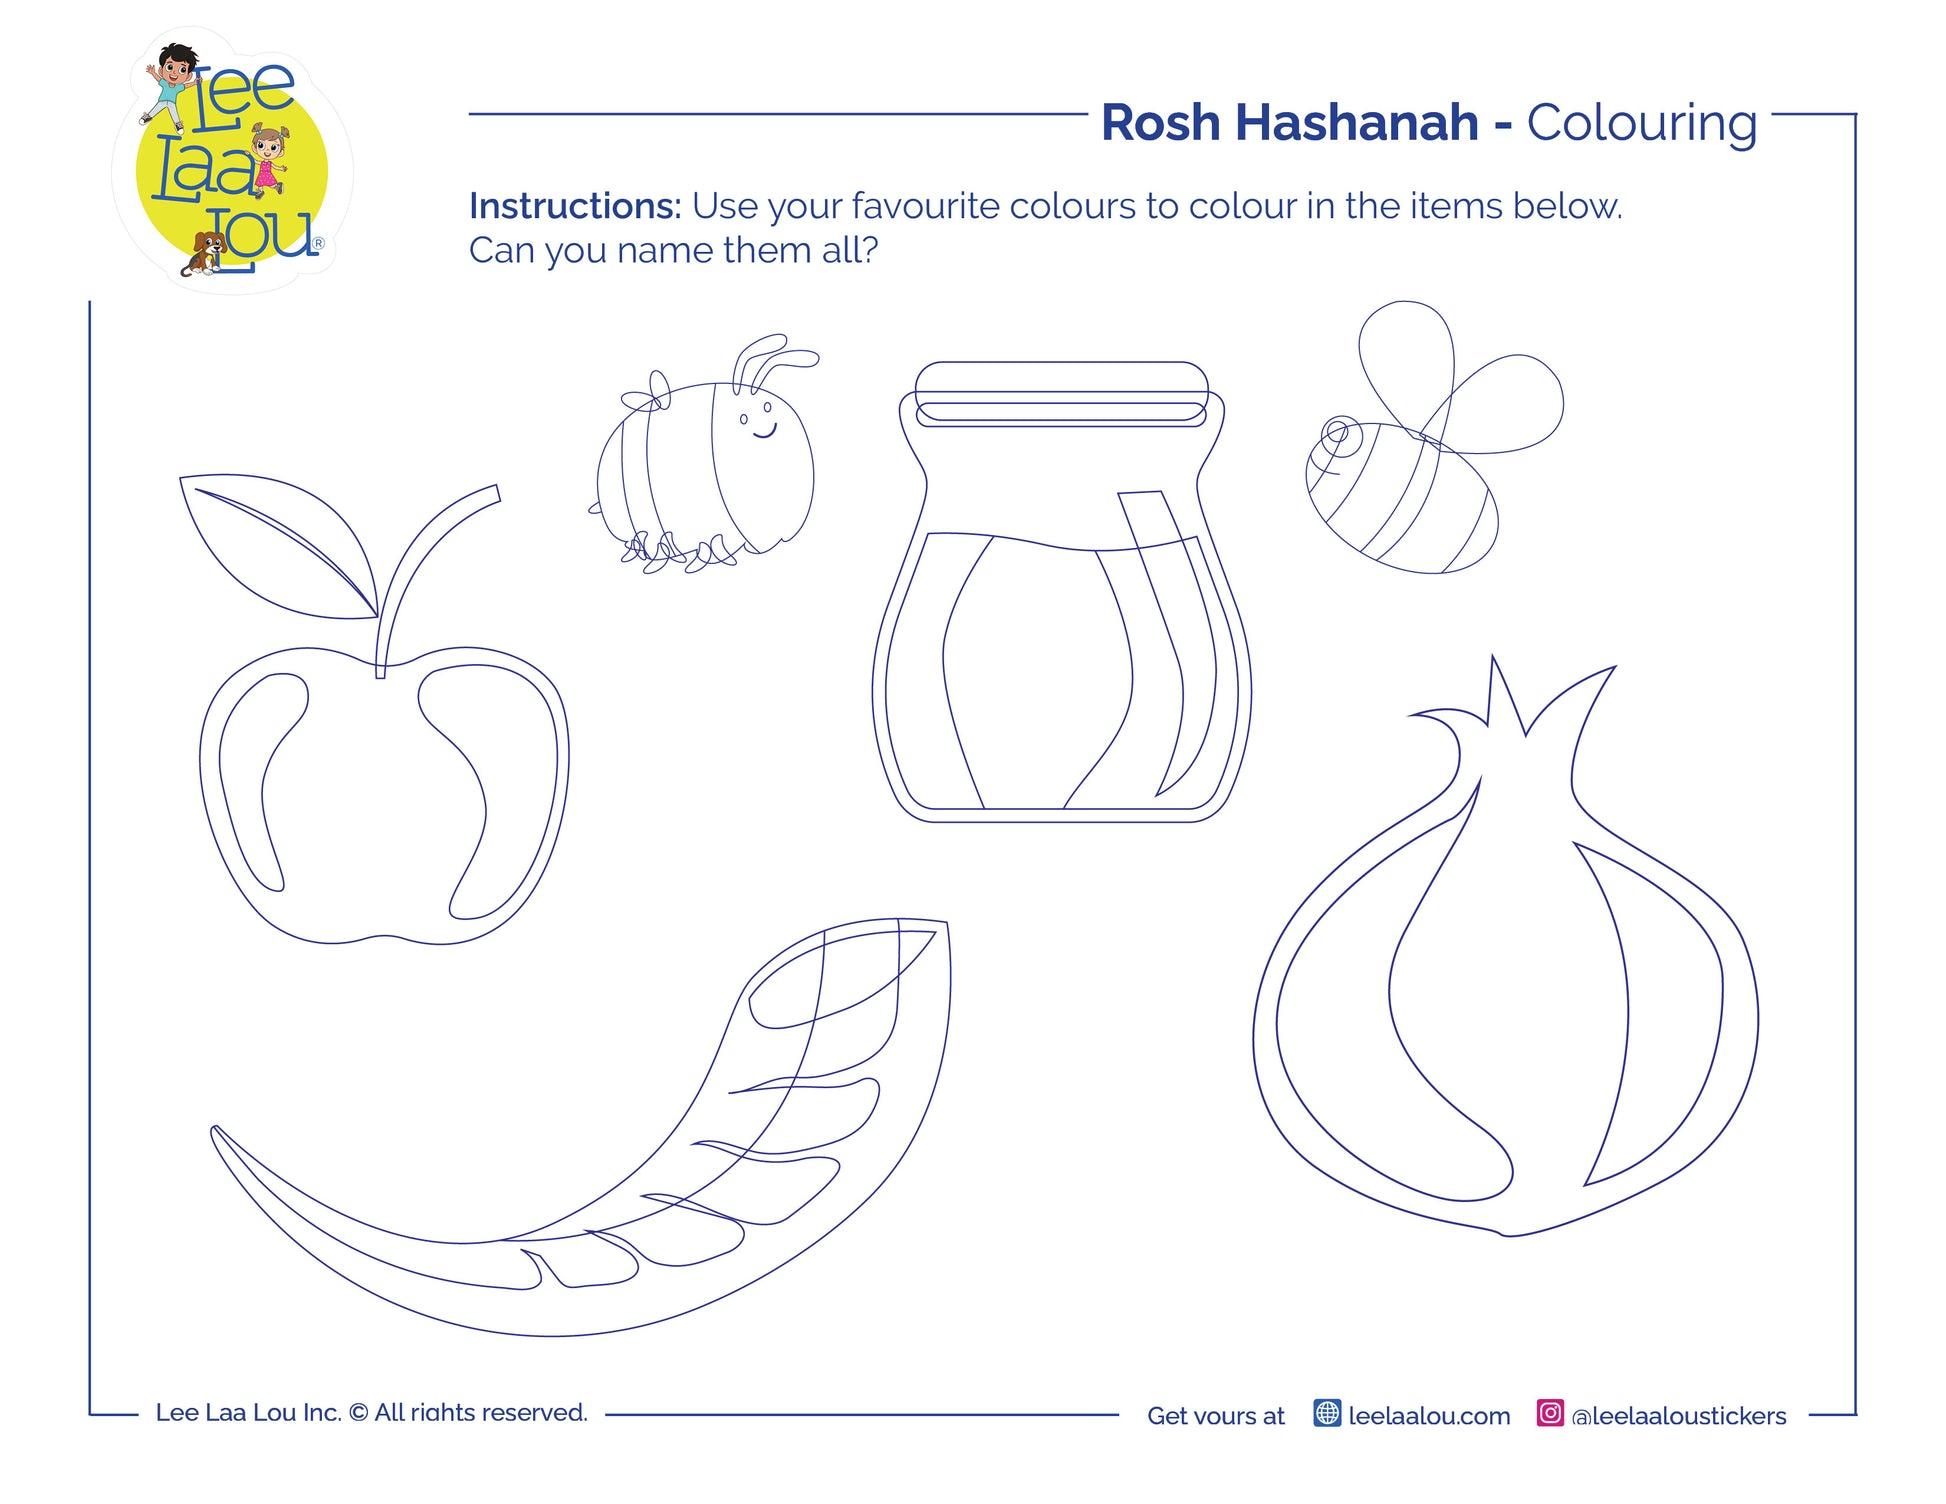 Coloring page for Rosh Hashanah